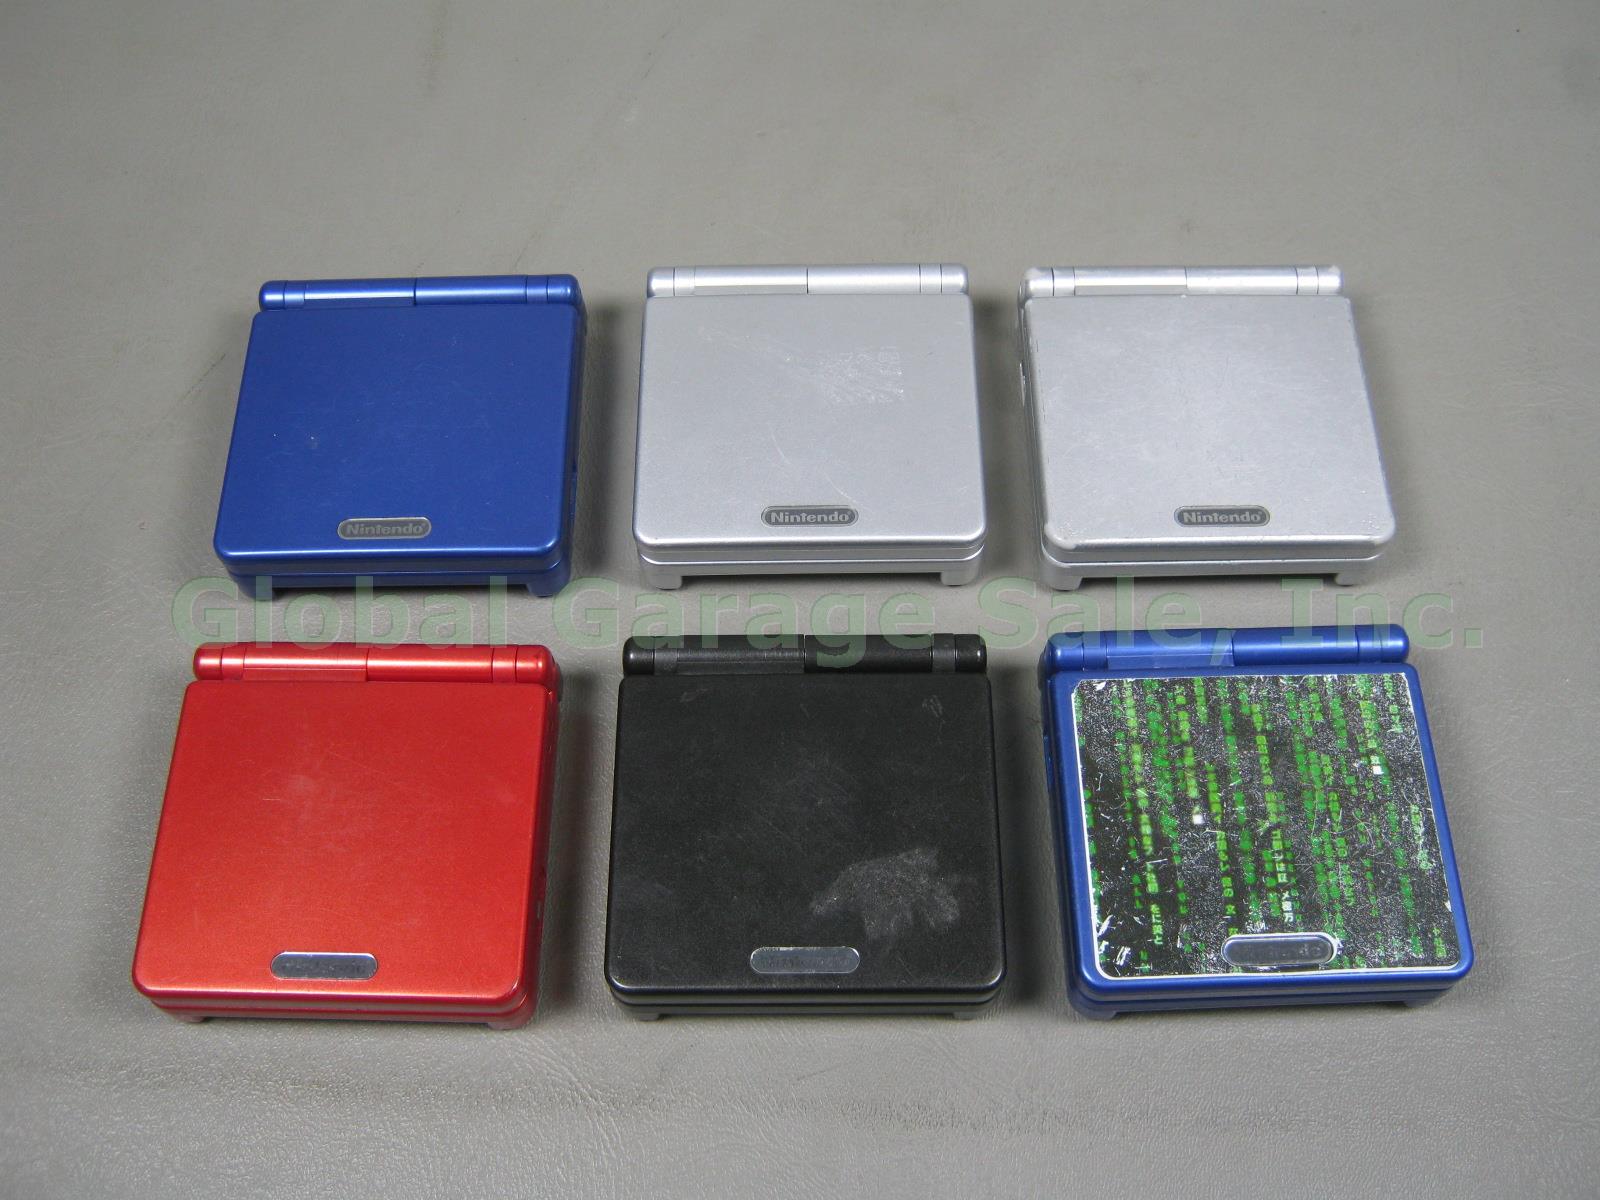 6 Nintendo Gameboy Advance GBA SP AGS-001 Consoles System Collection Bundle Lot 1